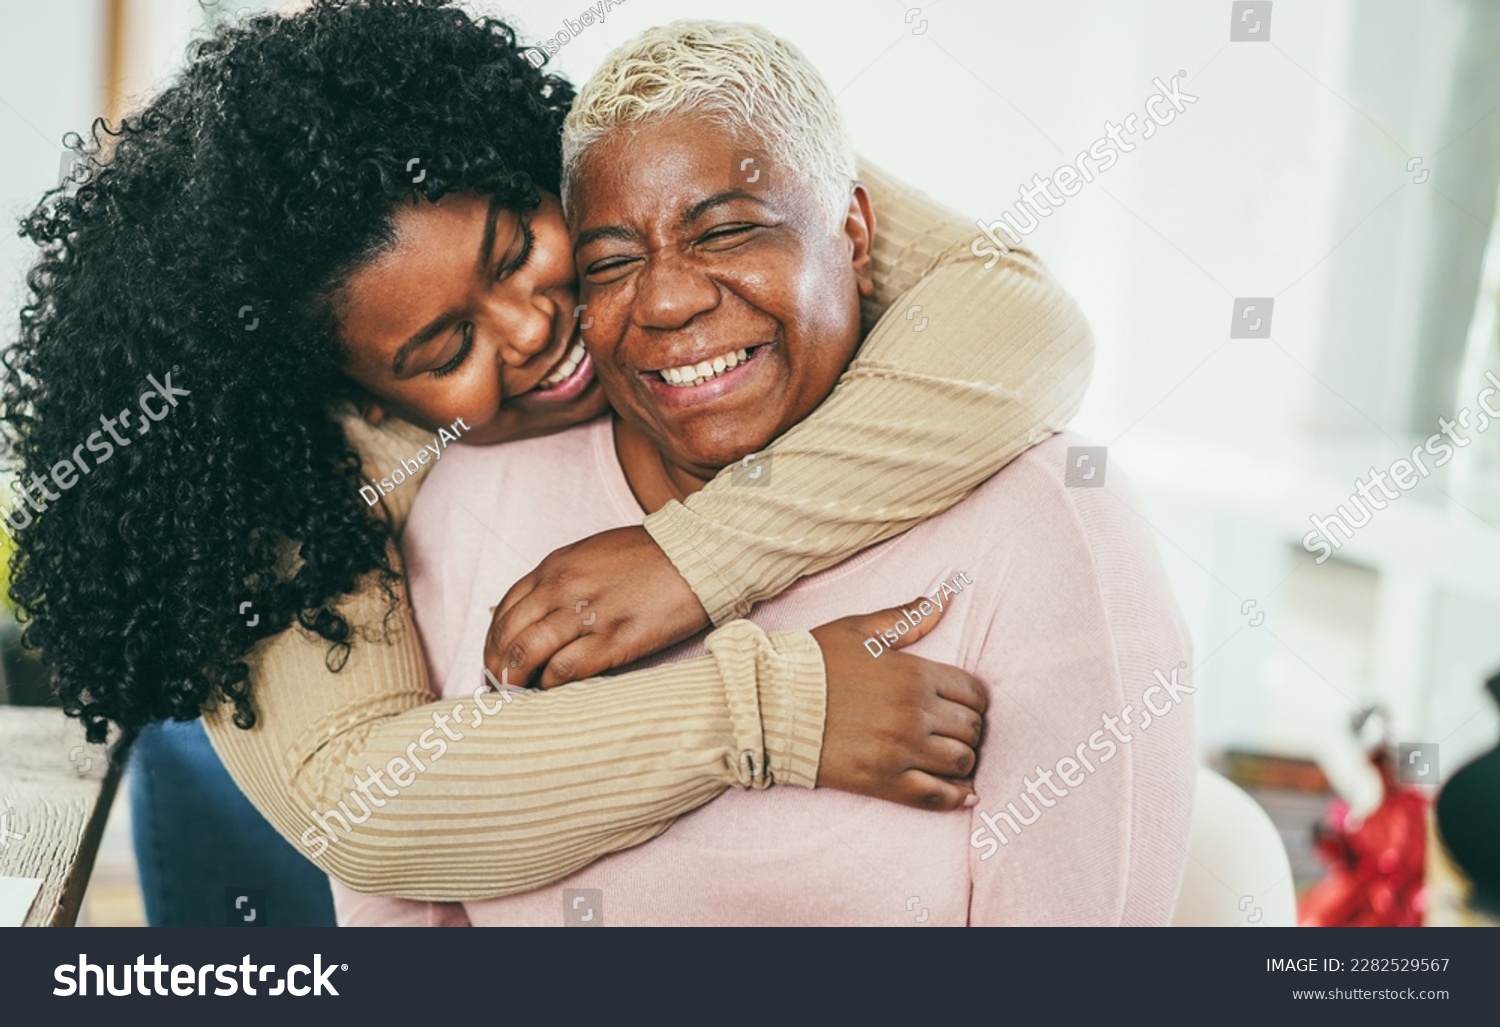 African daughter hugging her mum indoors at home - Main focus on senior mother face - Mom day and family love concept #2282529567